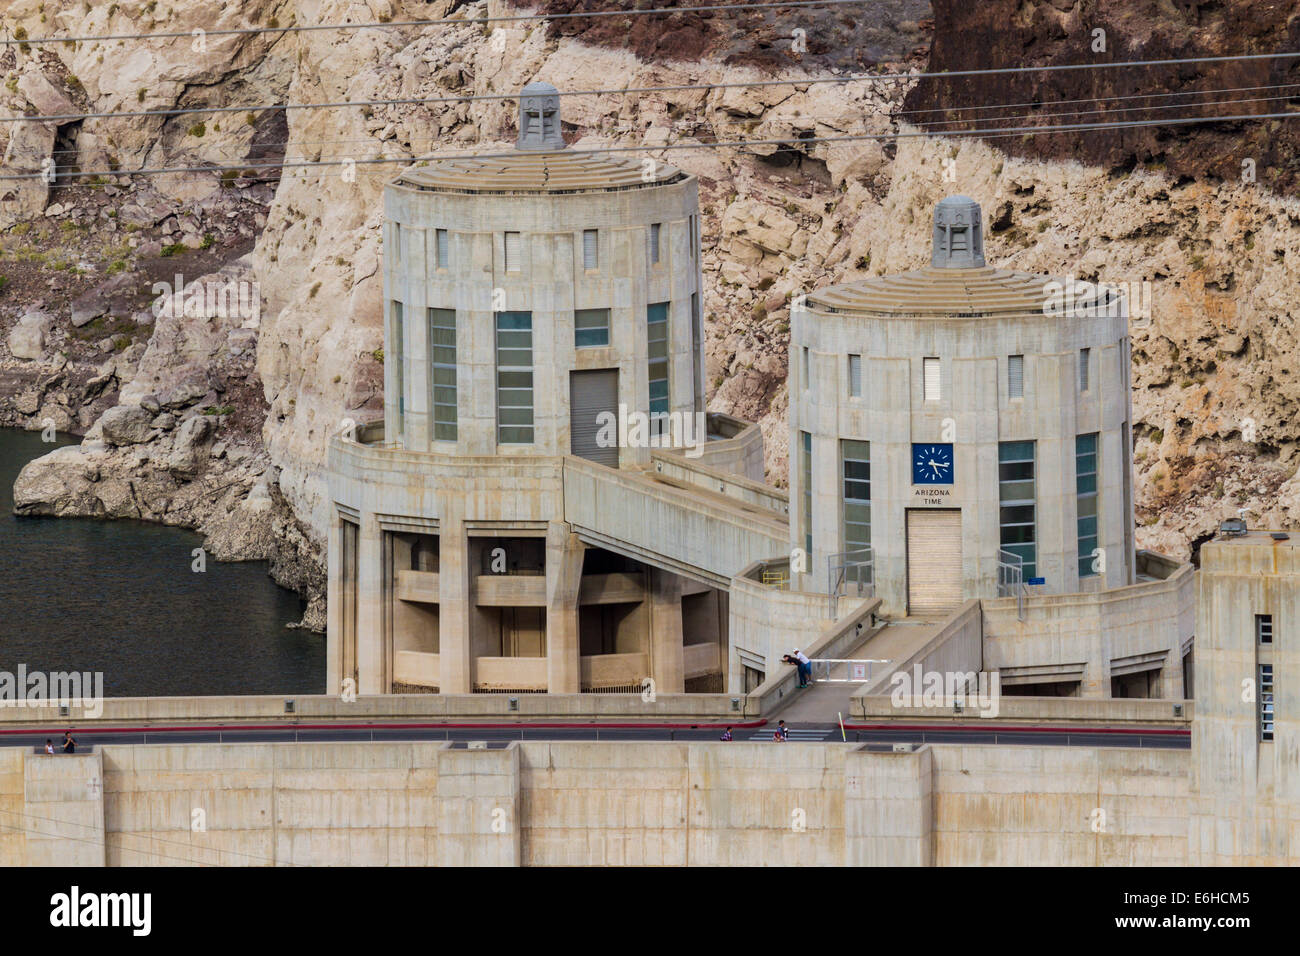 Water intake towers at Hoover Dam in the Black Canyon of the Colorado River near Boulder City, Nevada Stock Photo